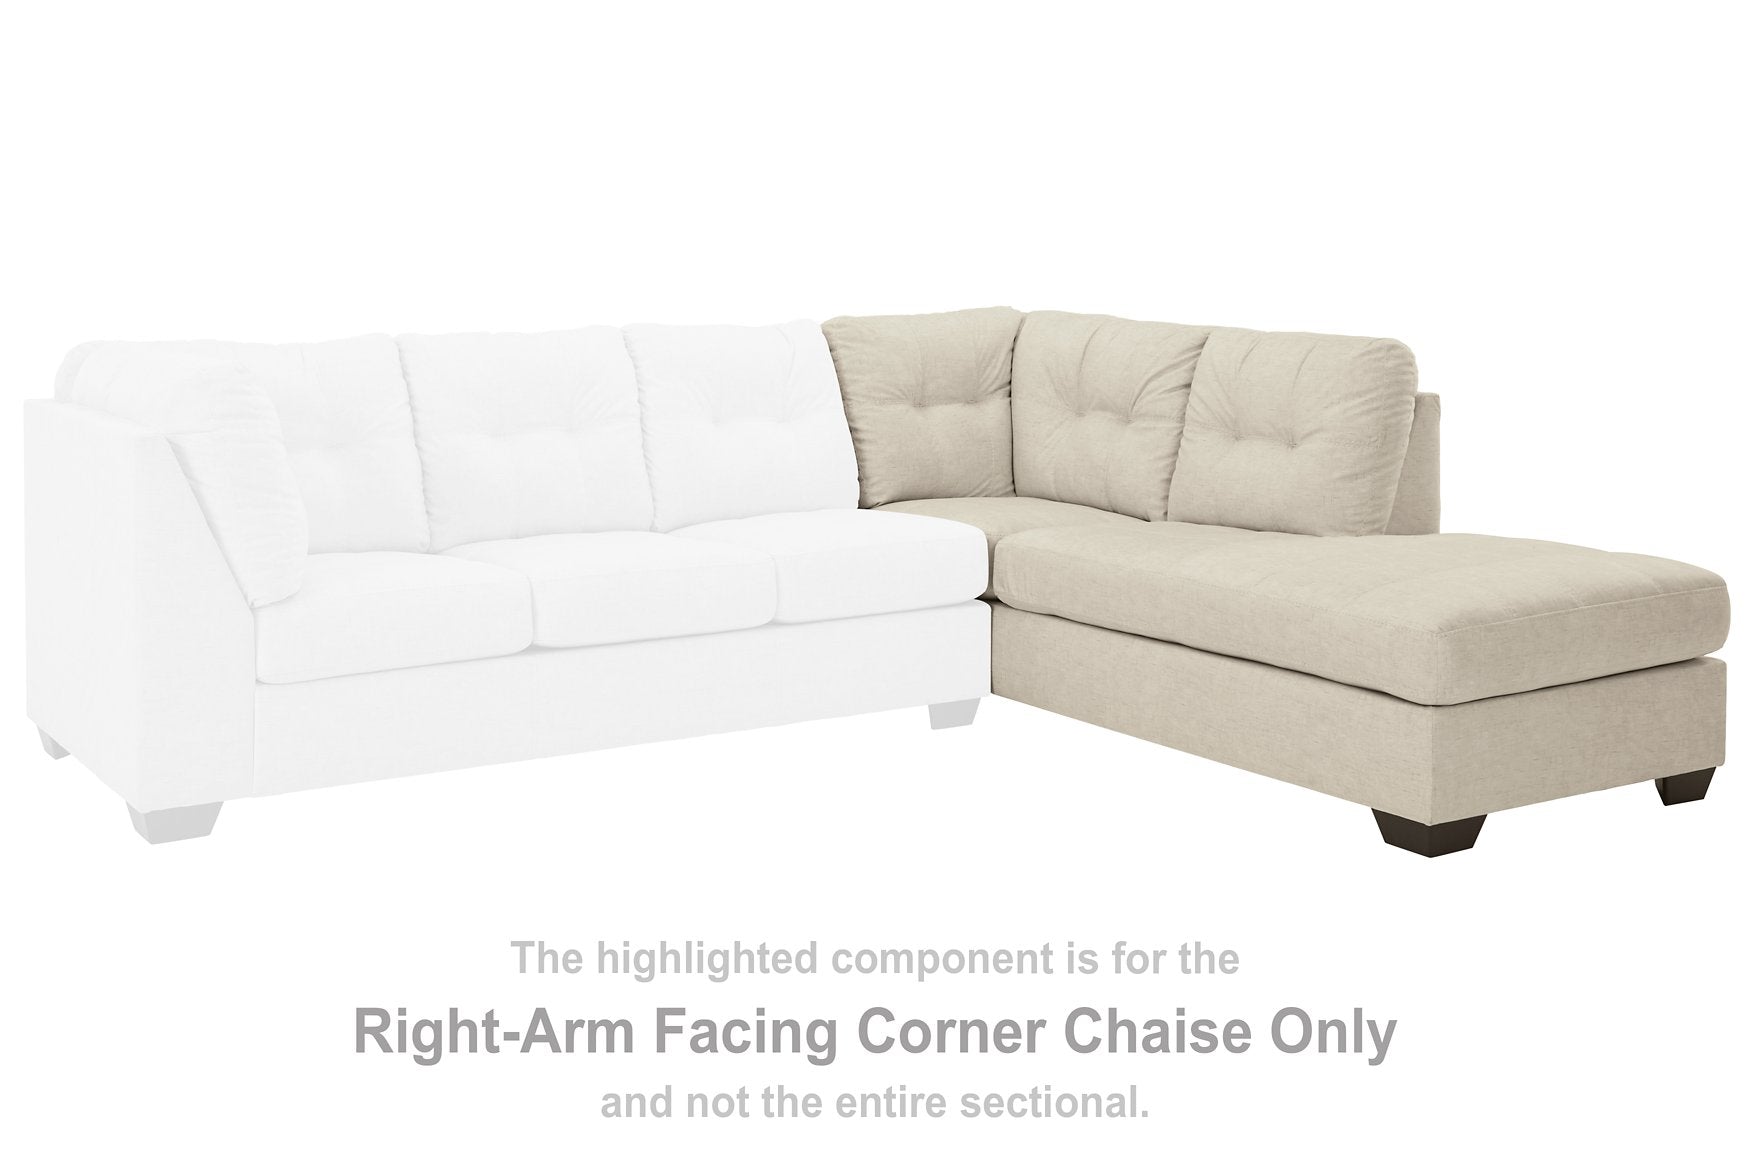 Falkirk 2-Piece Sectional with Chaise - Half Price Furniture